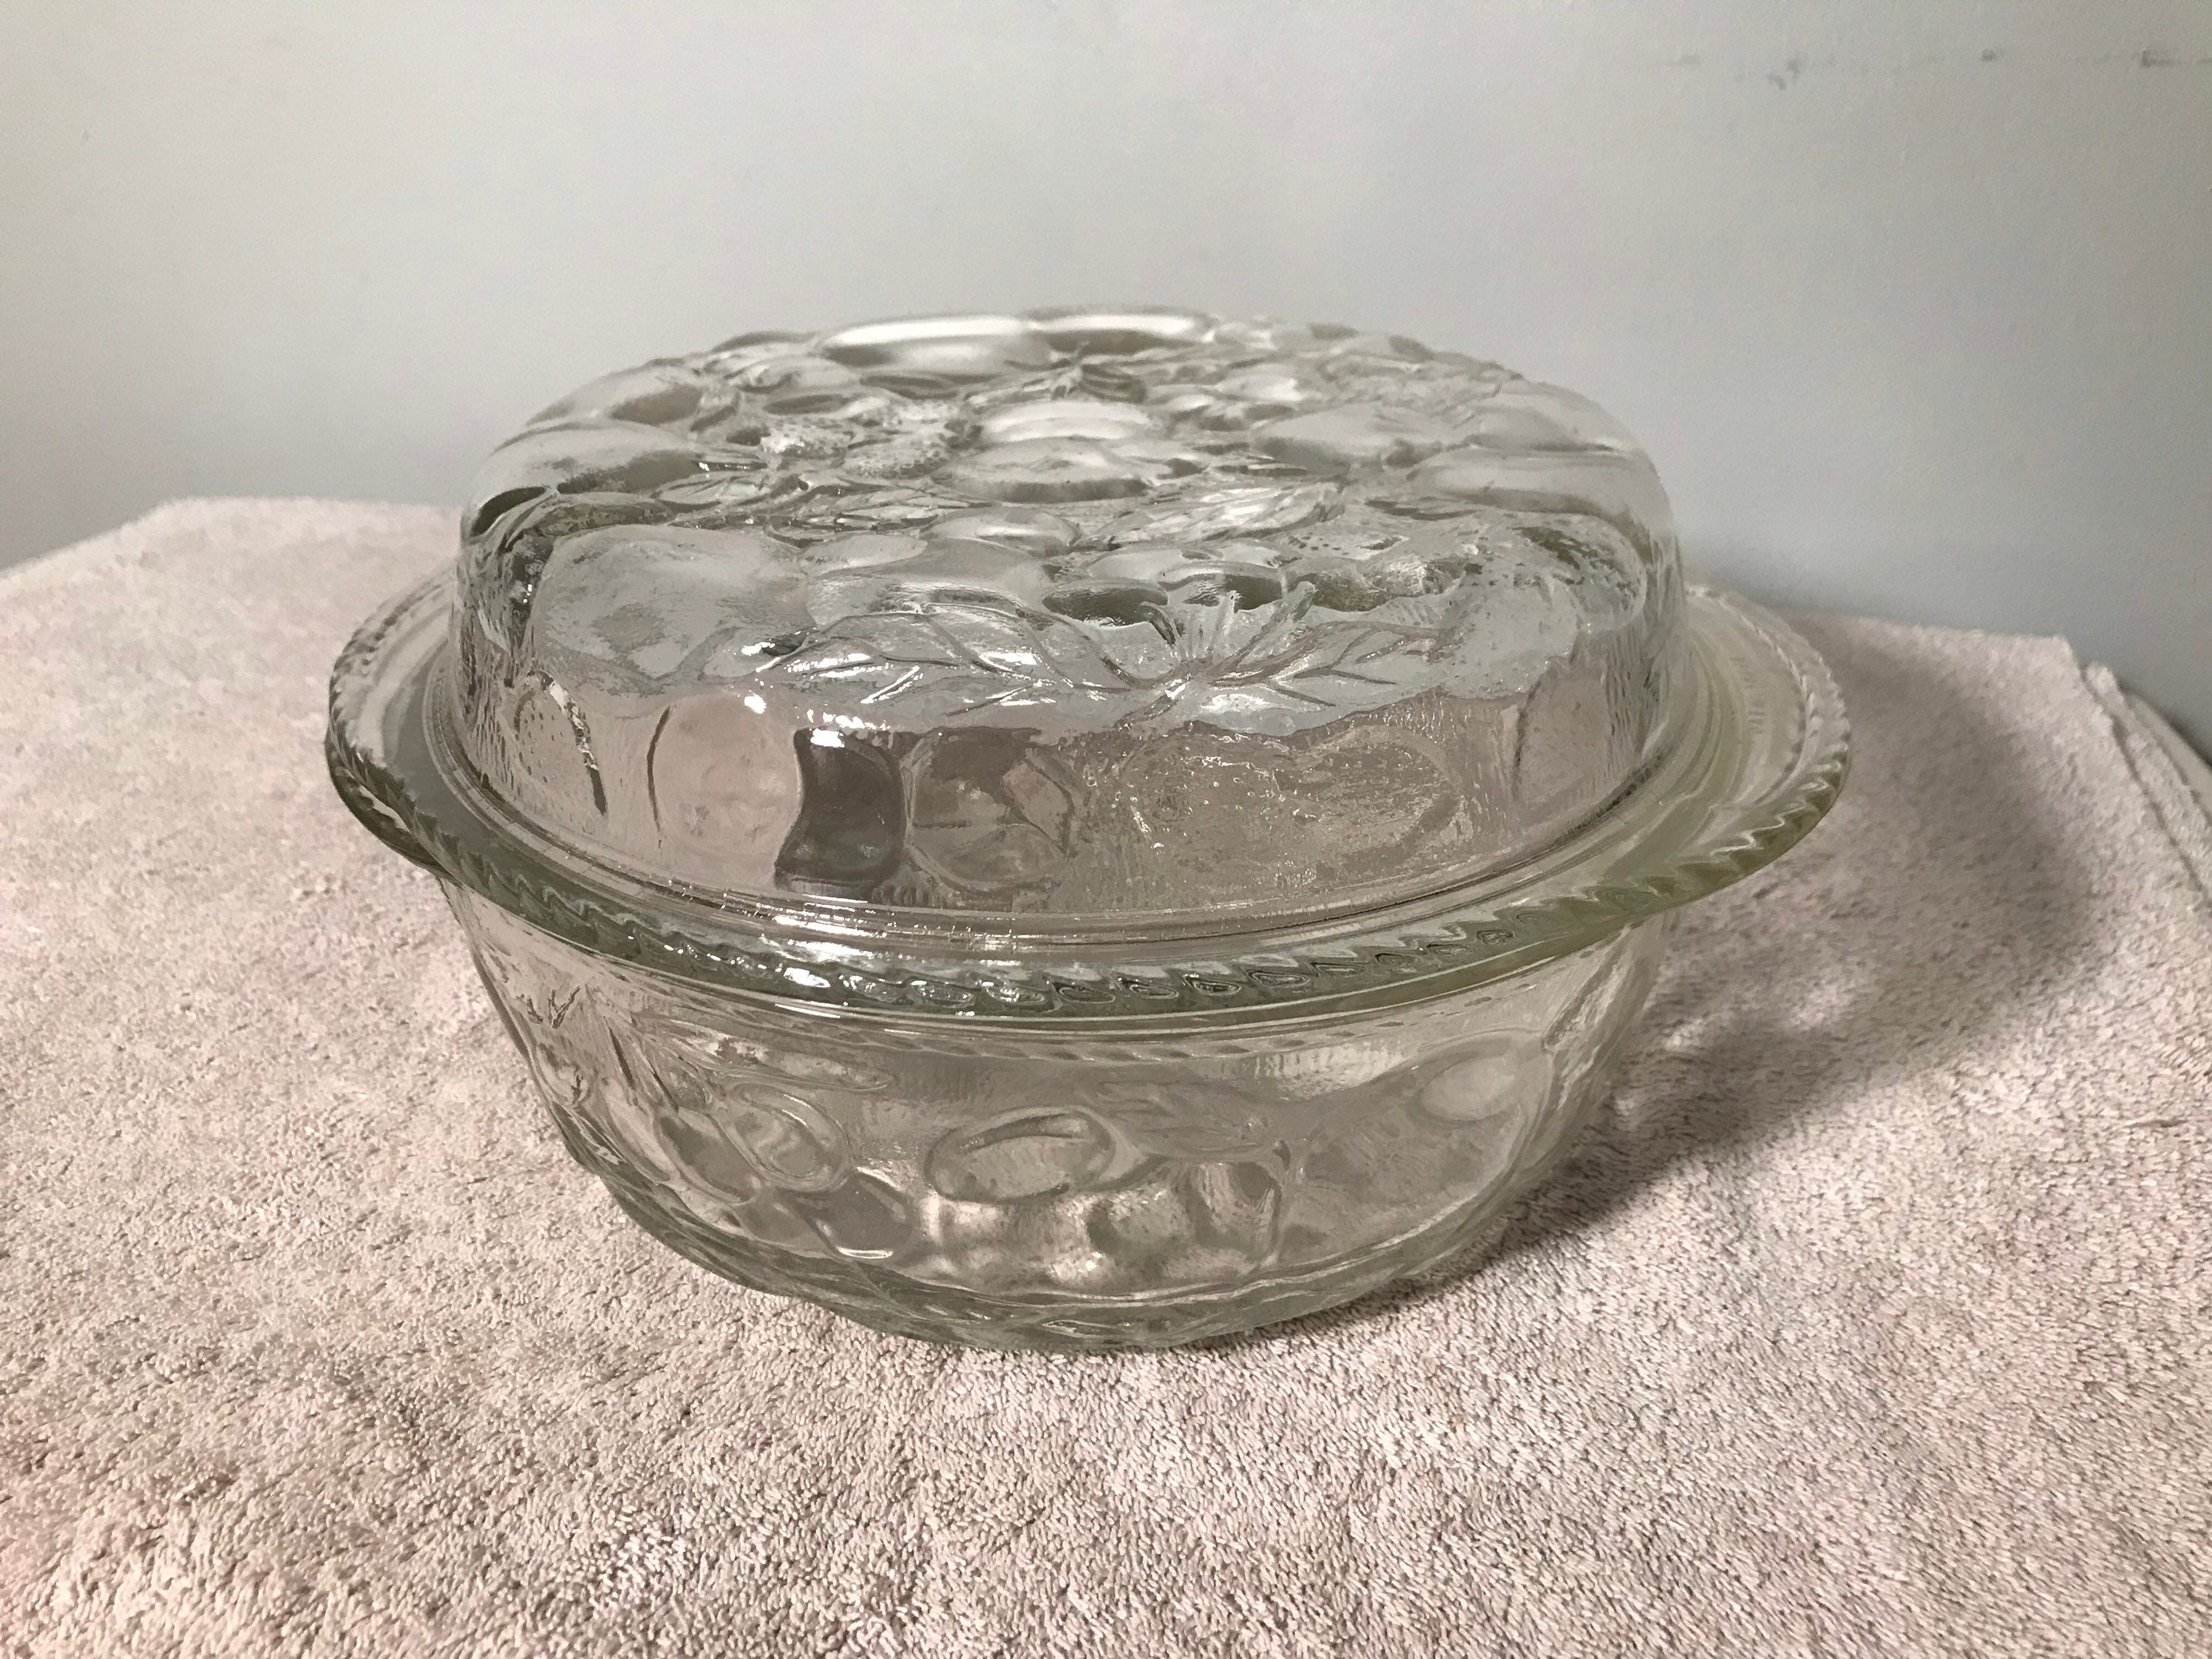 Libbey's Baker's Basic 8x8 Baking Glass Dish – Old Time Pottery